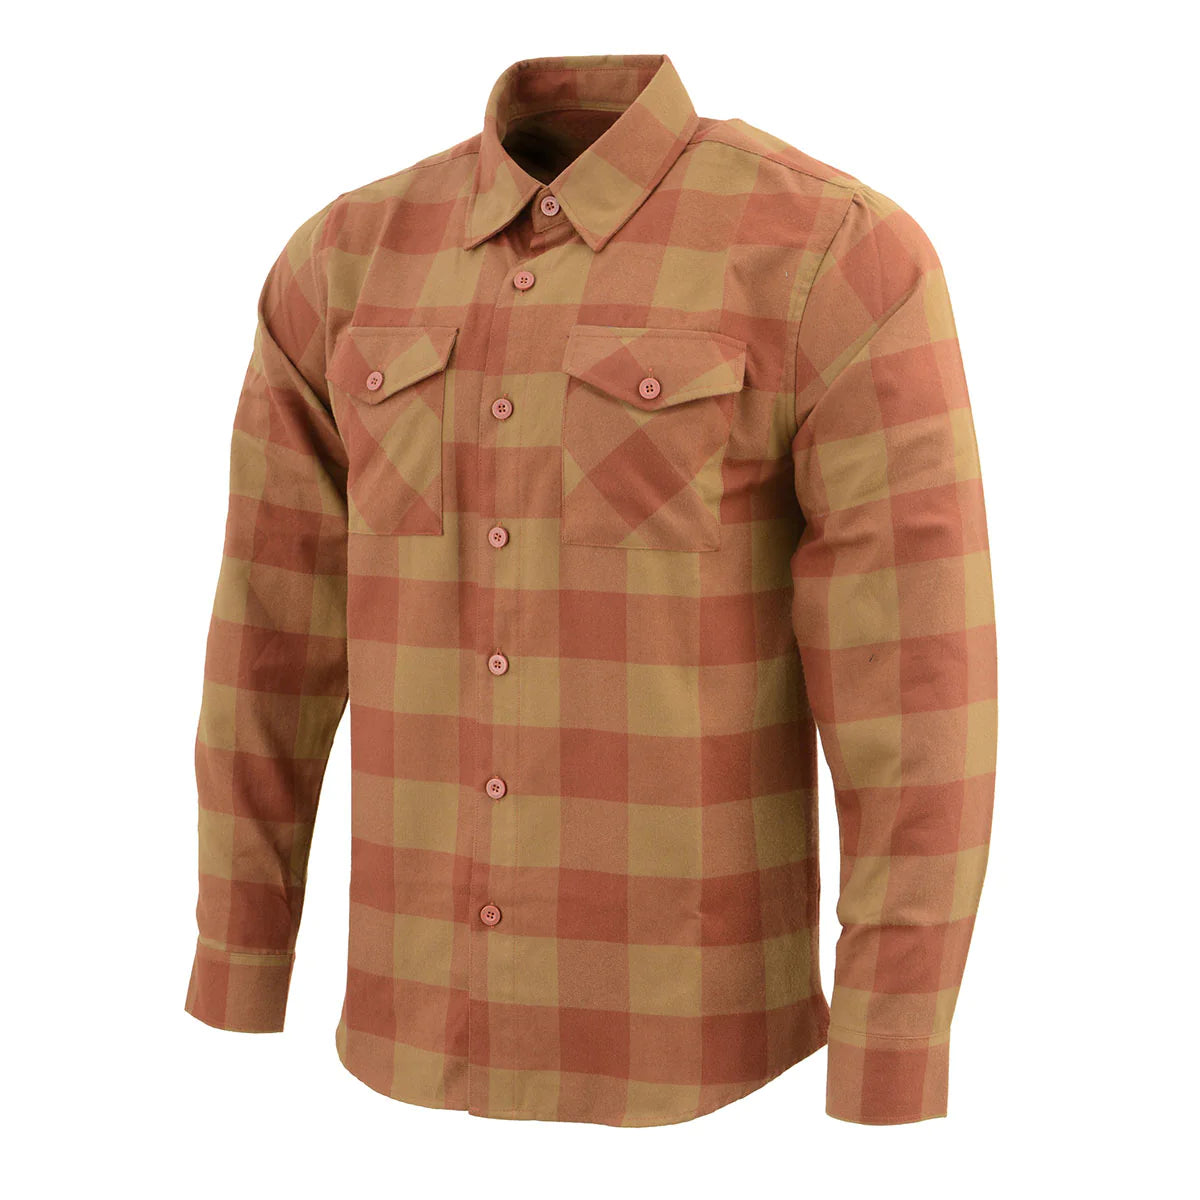 Men's Brown and Beige Long Sleeve Cotton Flannel Shirt